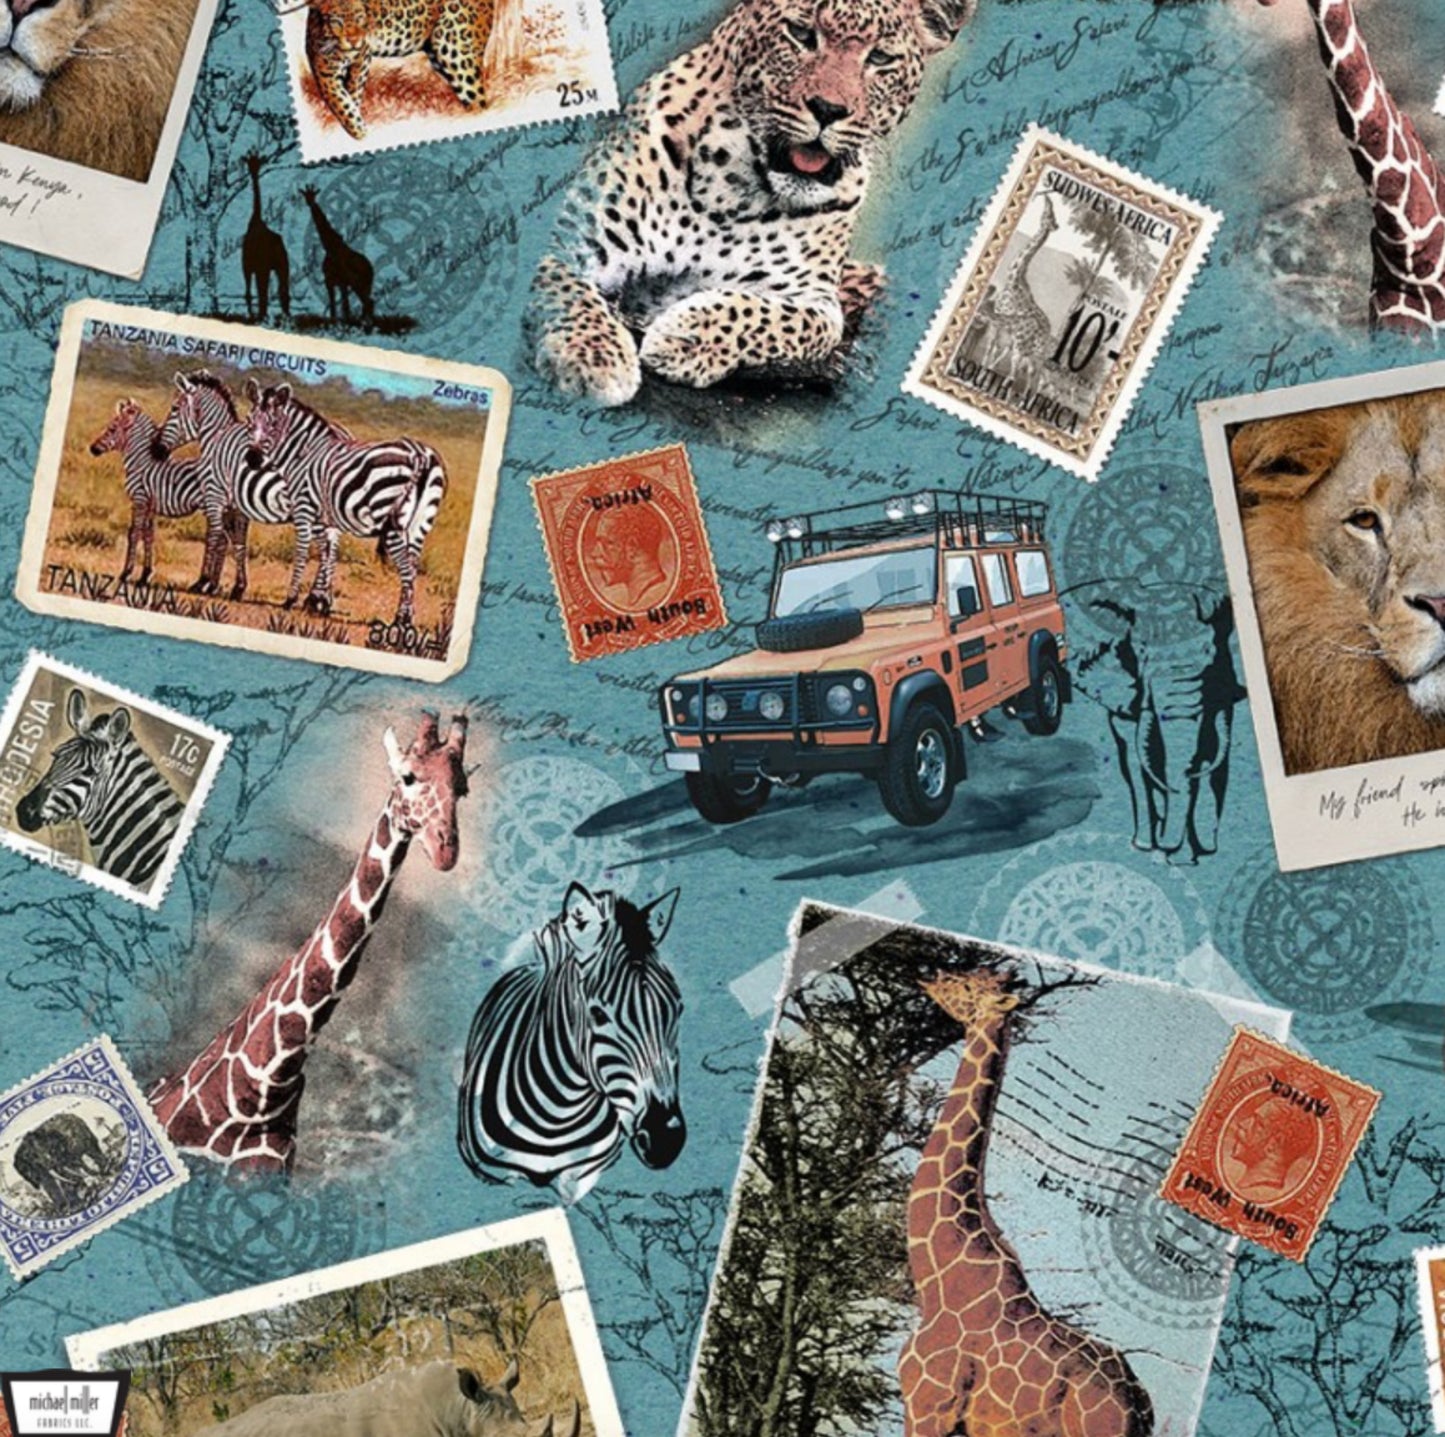 Safari Memories from the Safari Collection by Michael Miller Fabrics - Jeeps and Jungle Animals on an Aqua Background.